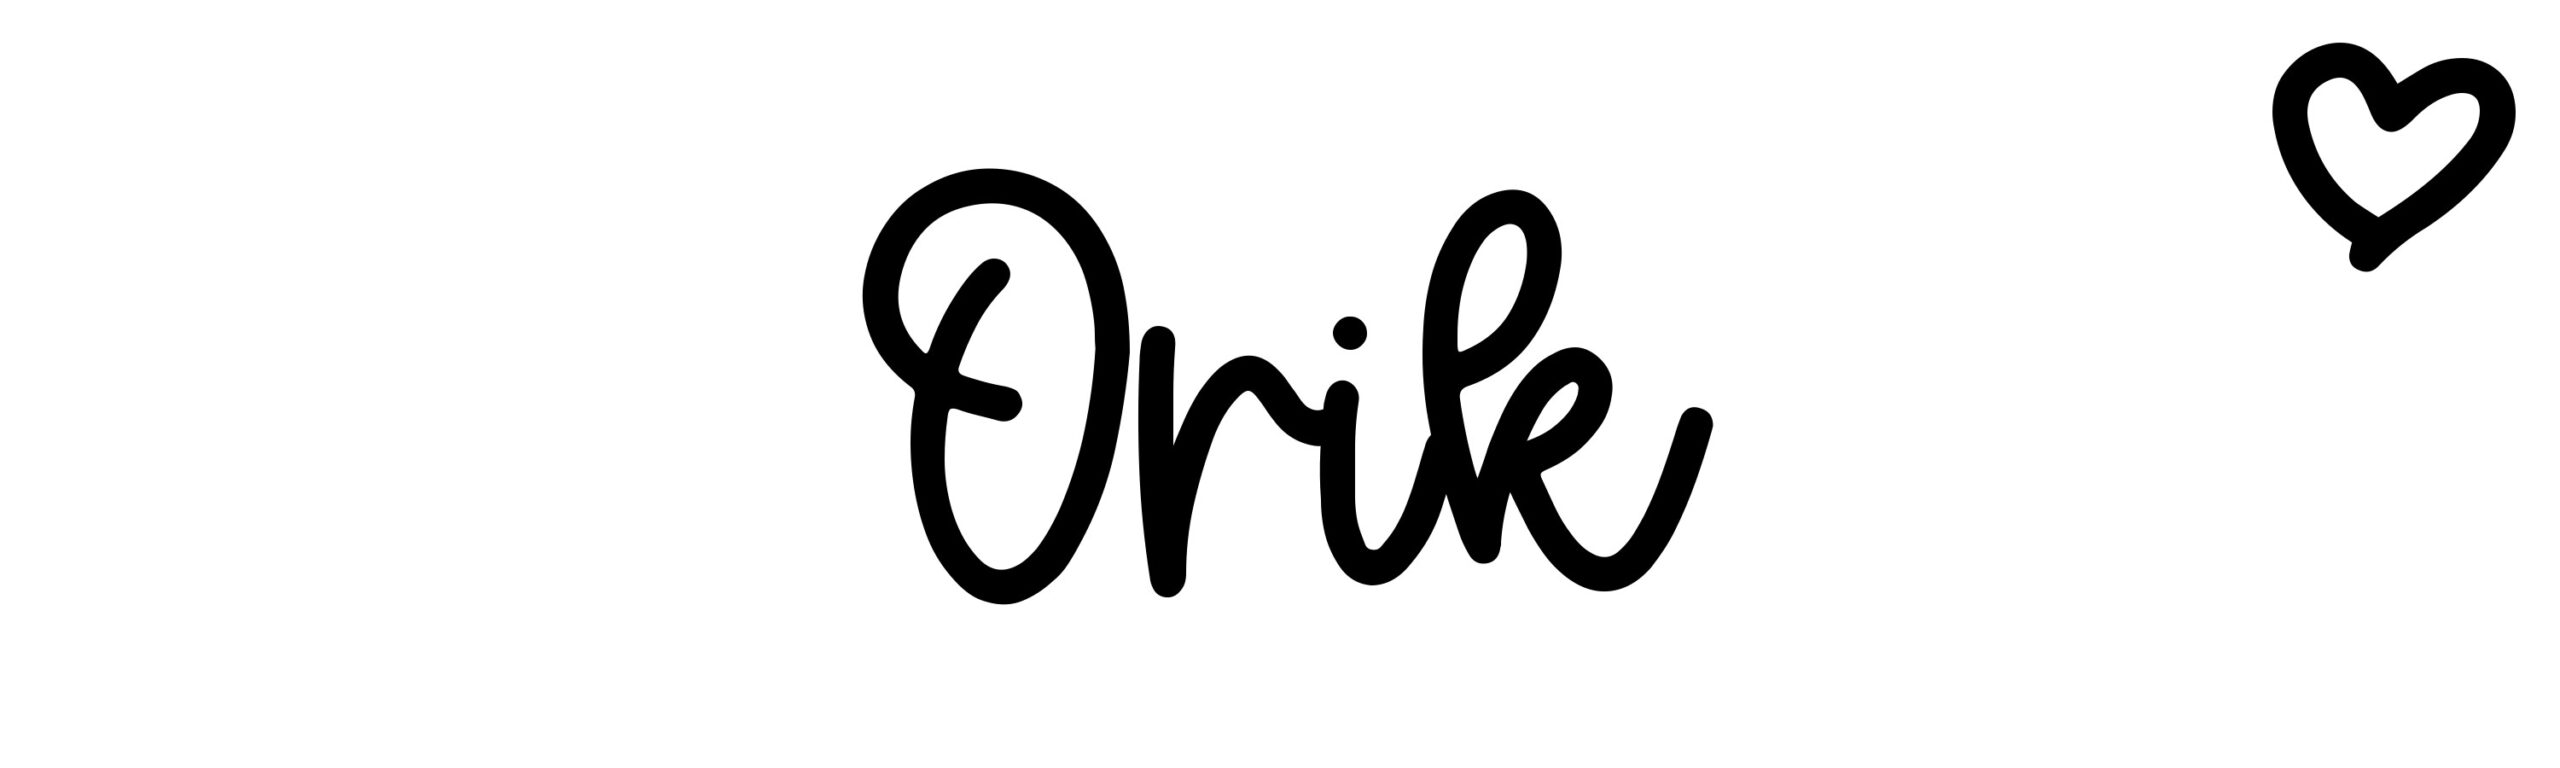 Orik - Name meaning, origin, variations and more